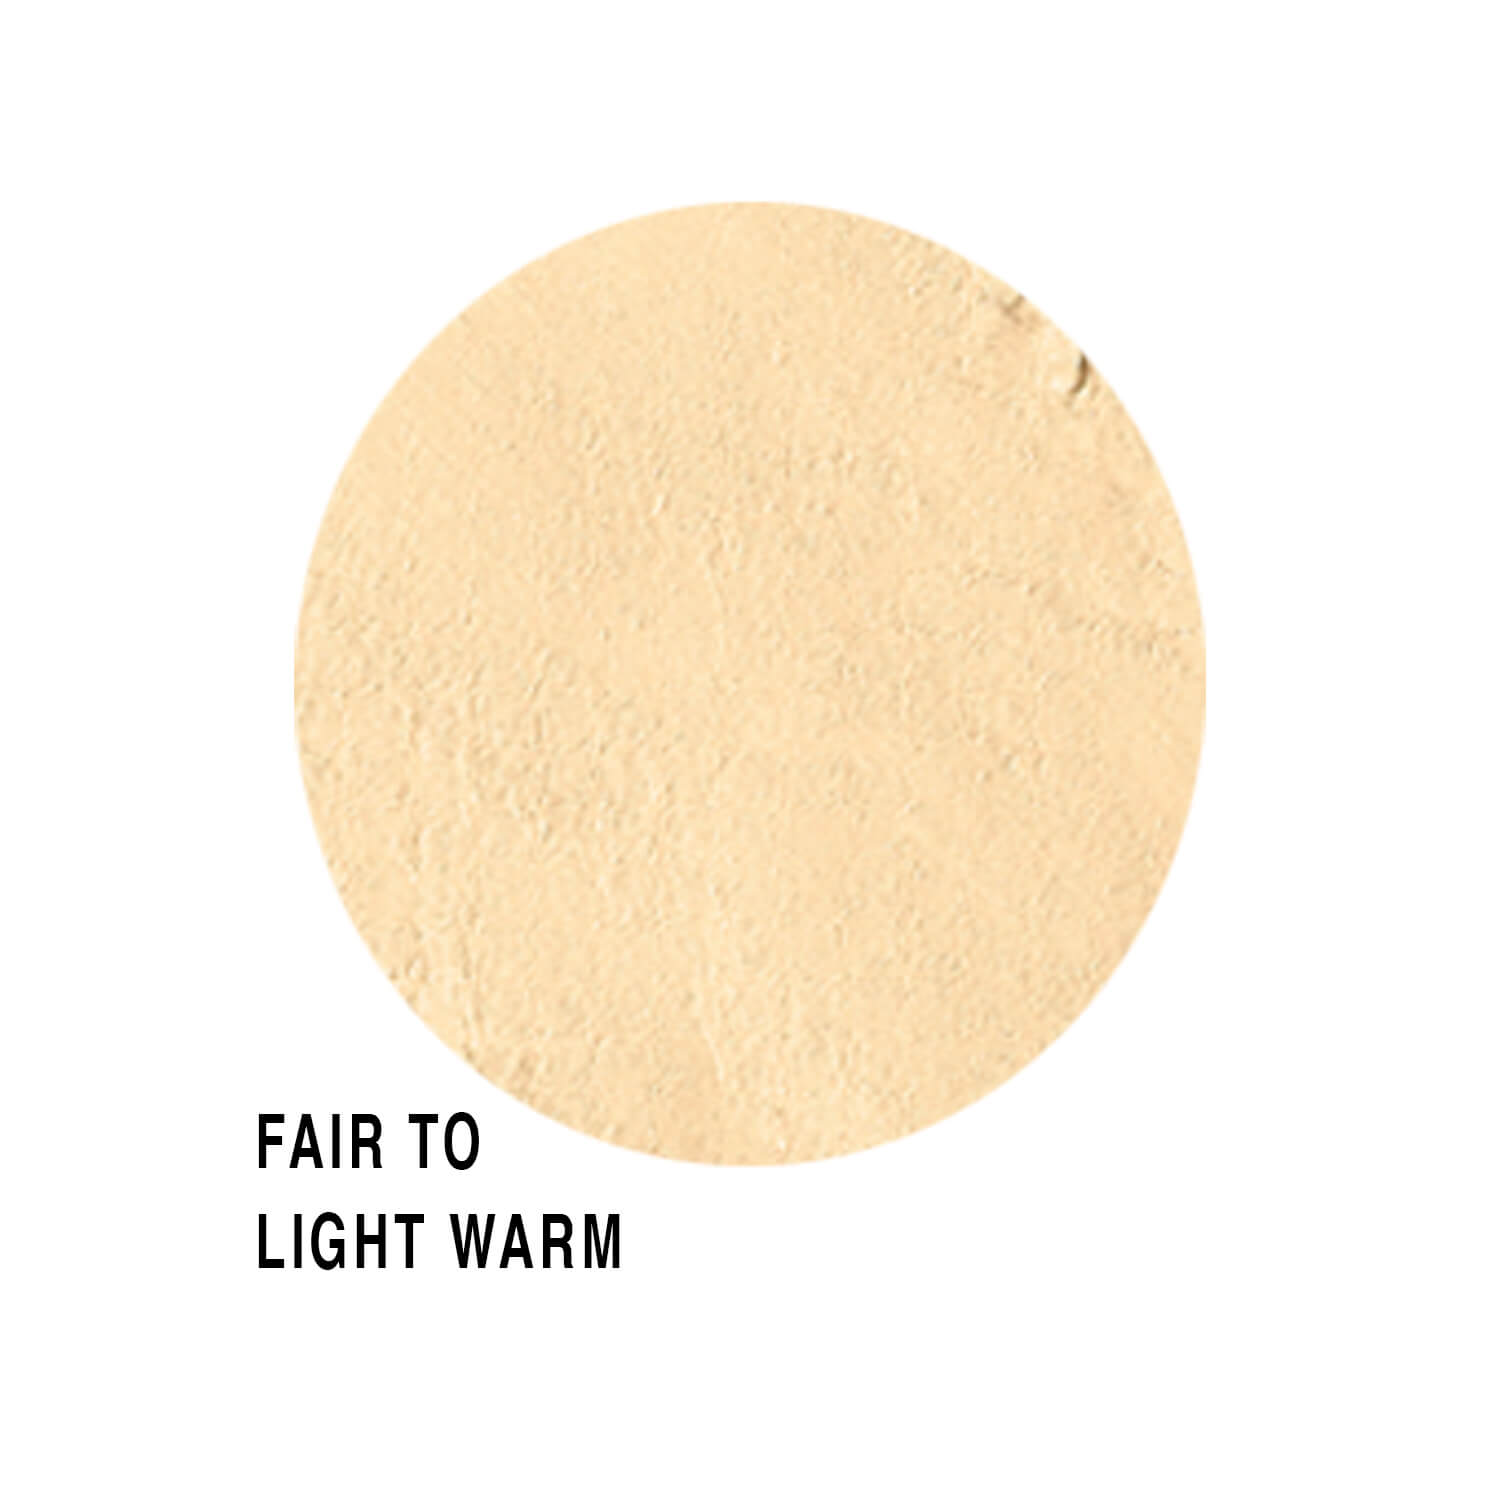 ulta makeup foundation fair to light warm swatch available at heygirl.pk for delivery in Pakistan